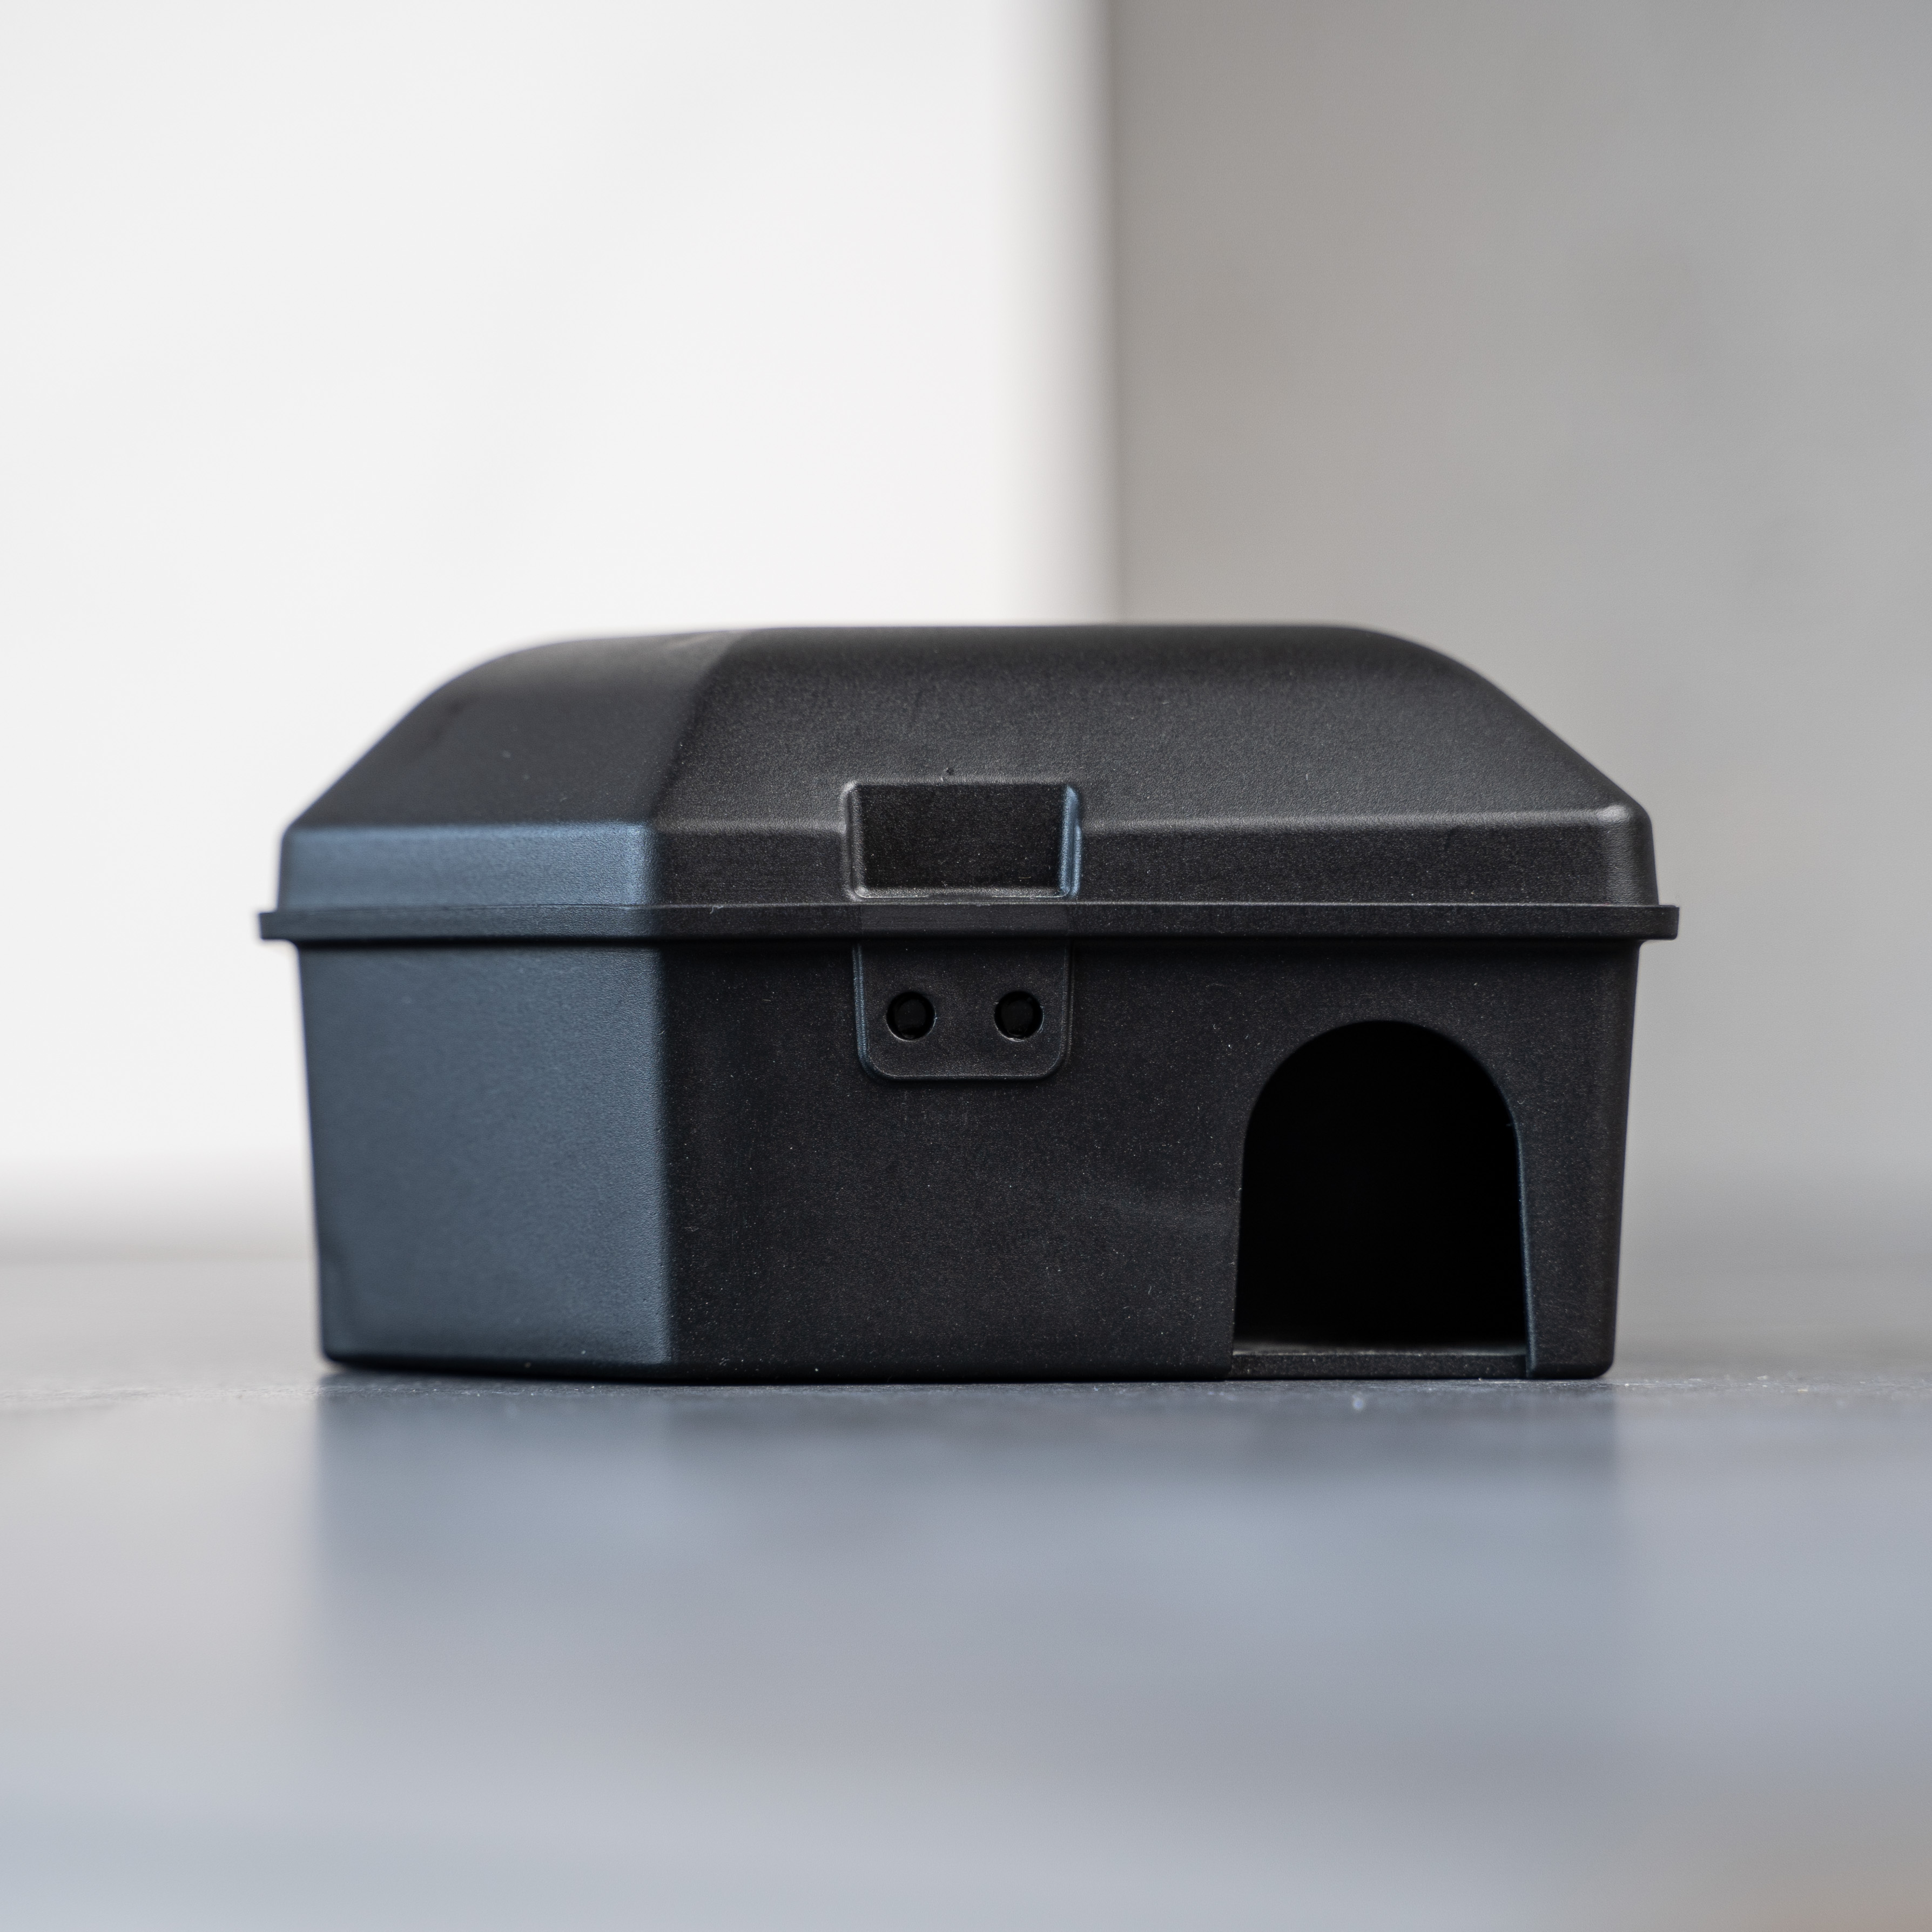 SNAPBOX | Single station for mousetraps